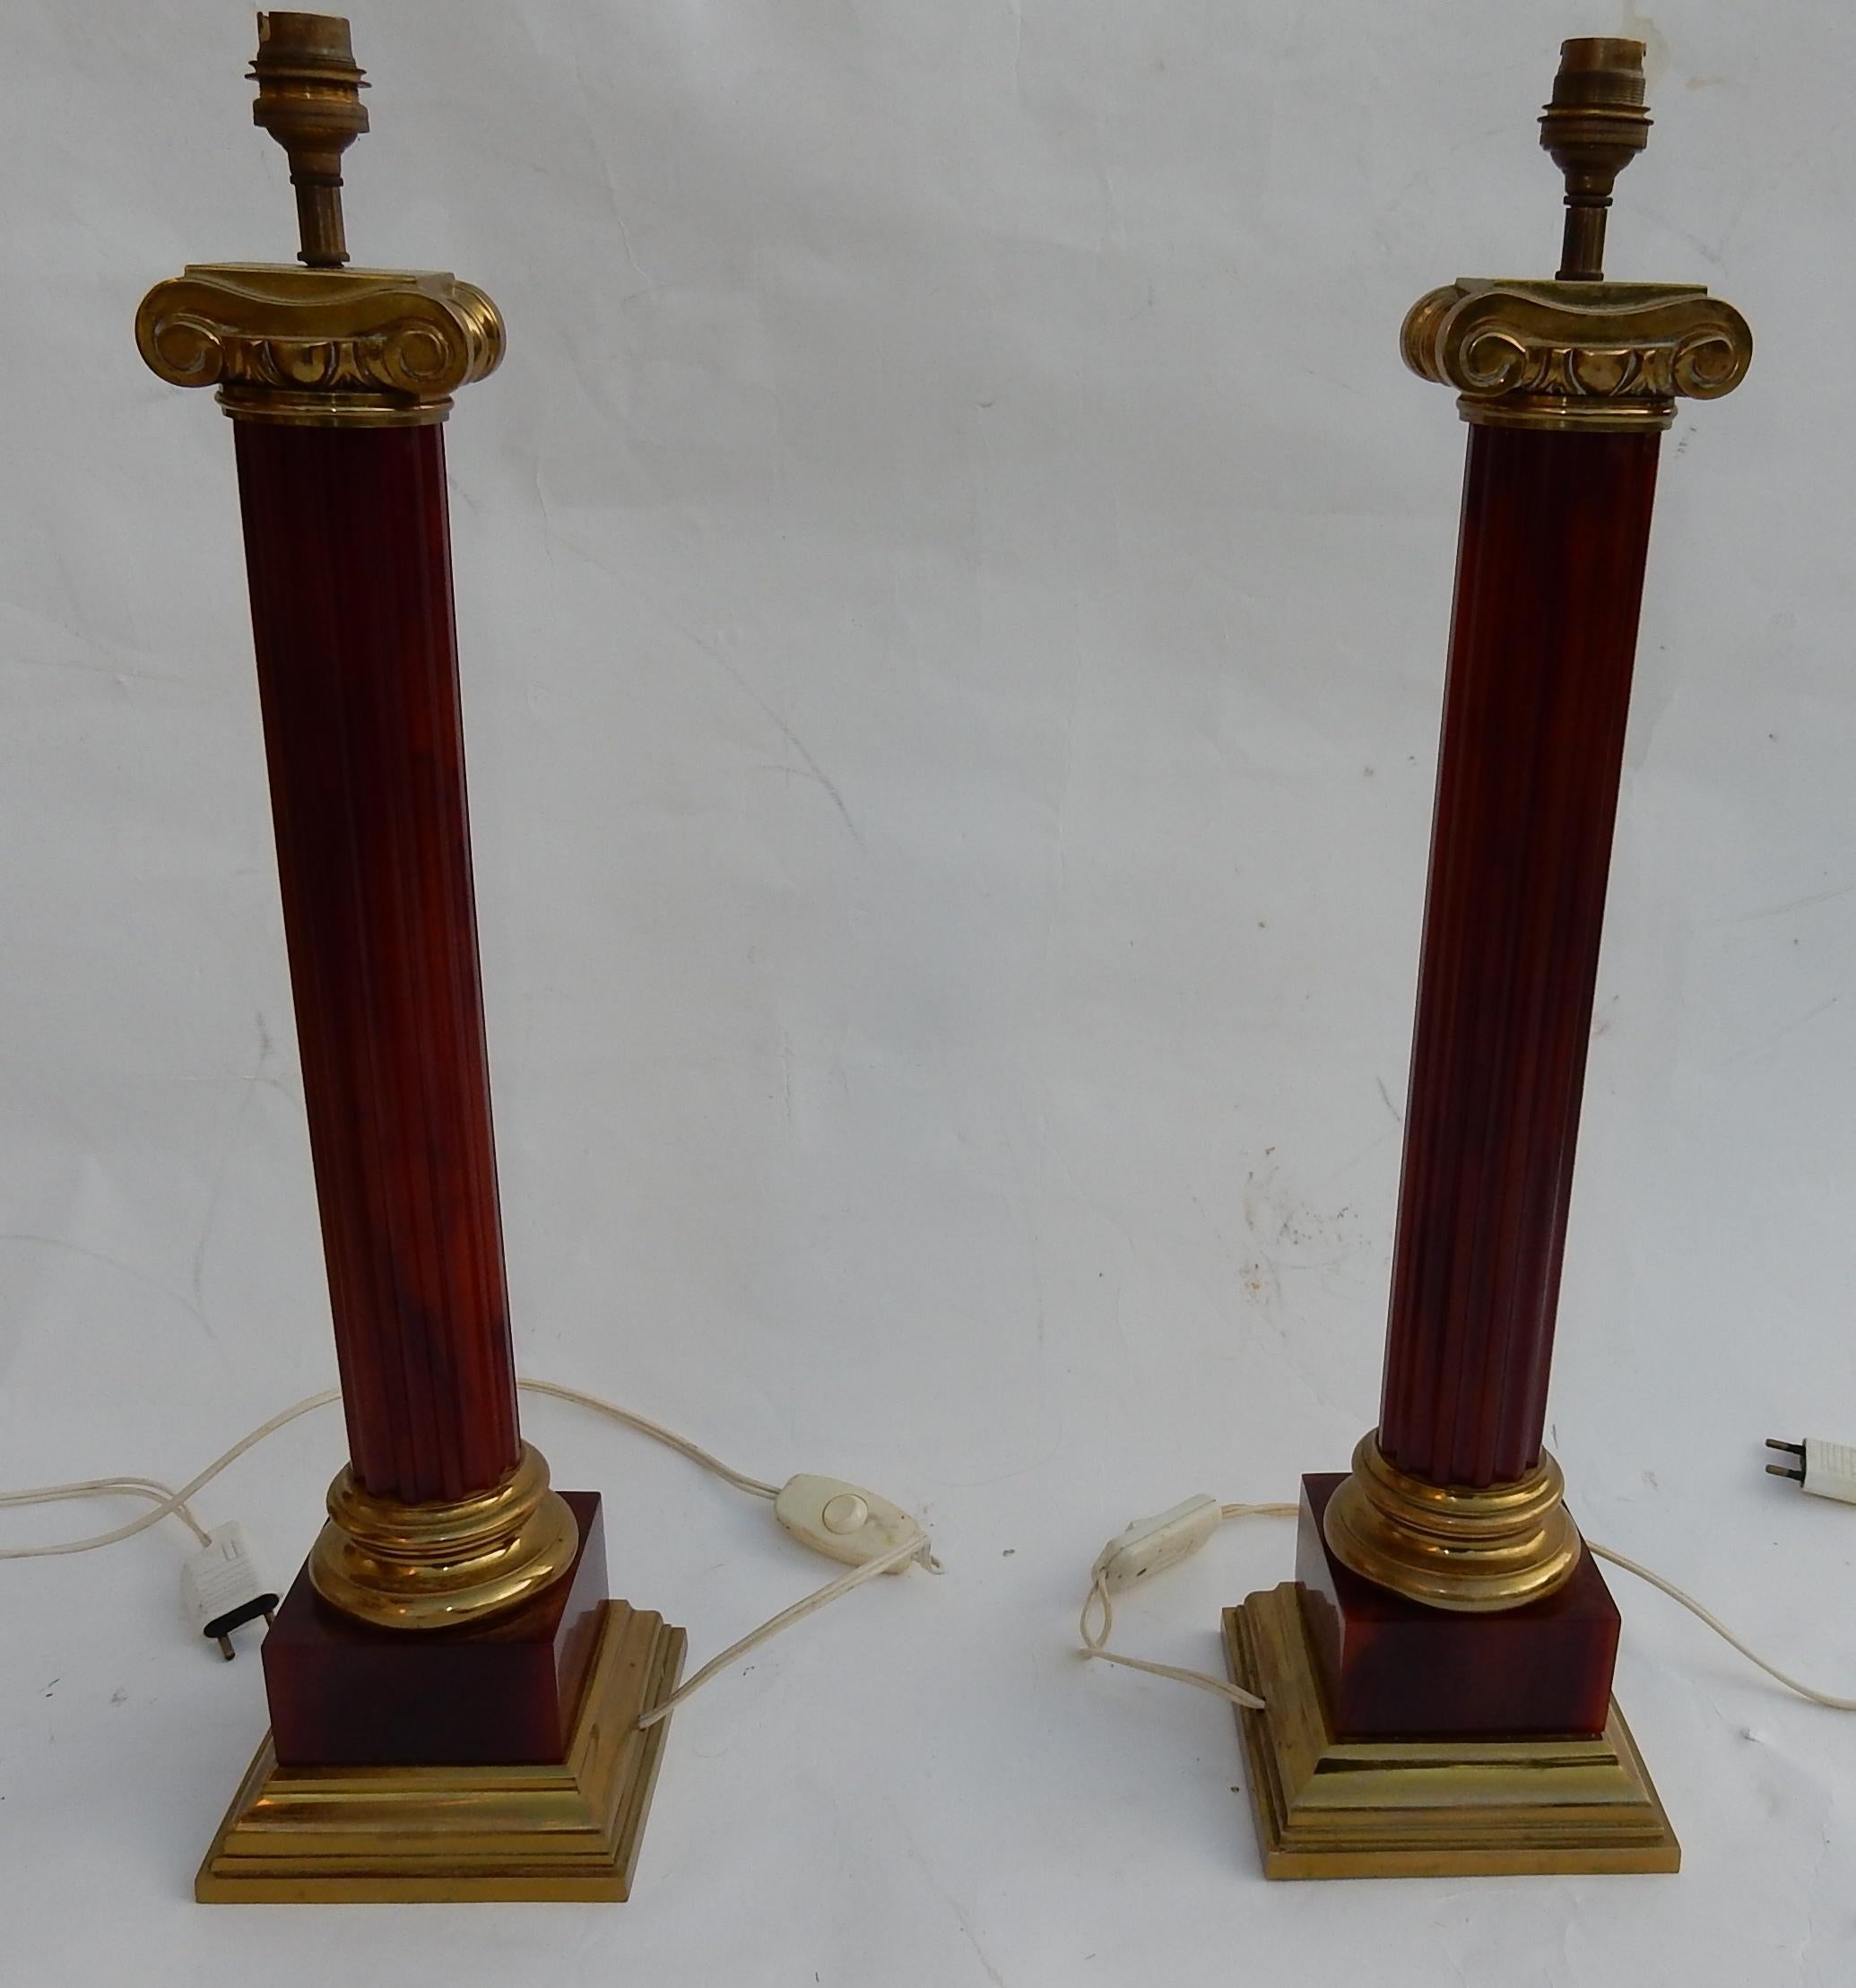 Pair of orange Bakelite lamps imitating amber, the barrels are fluted, column decoration with Corinthian capitals, in the style of Maison Jansen, circa 1950-1970
Measures: Base width and length 15 x 15 cm
Height 59 cm
Diameter of the column 6